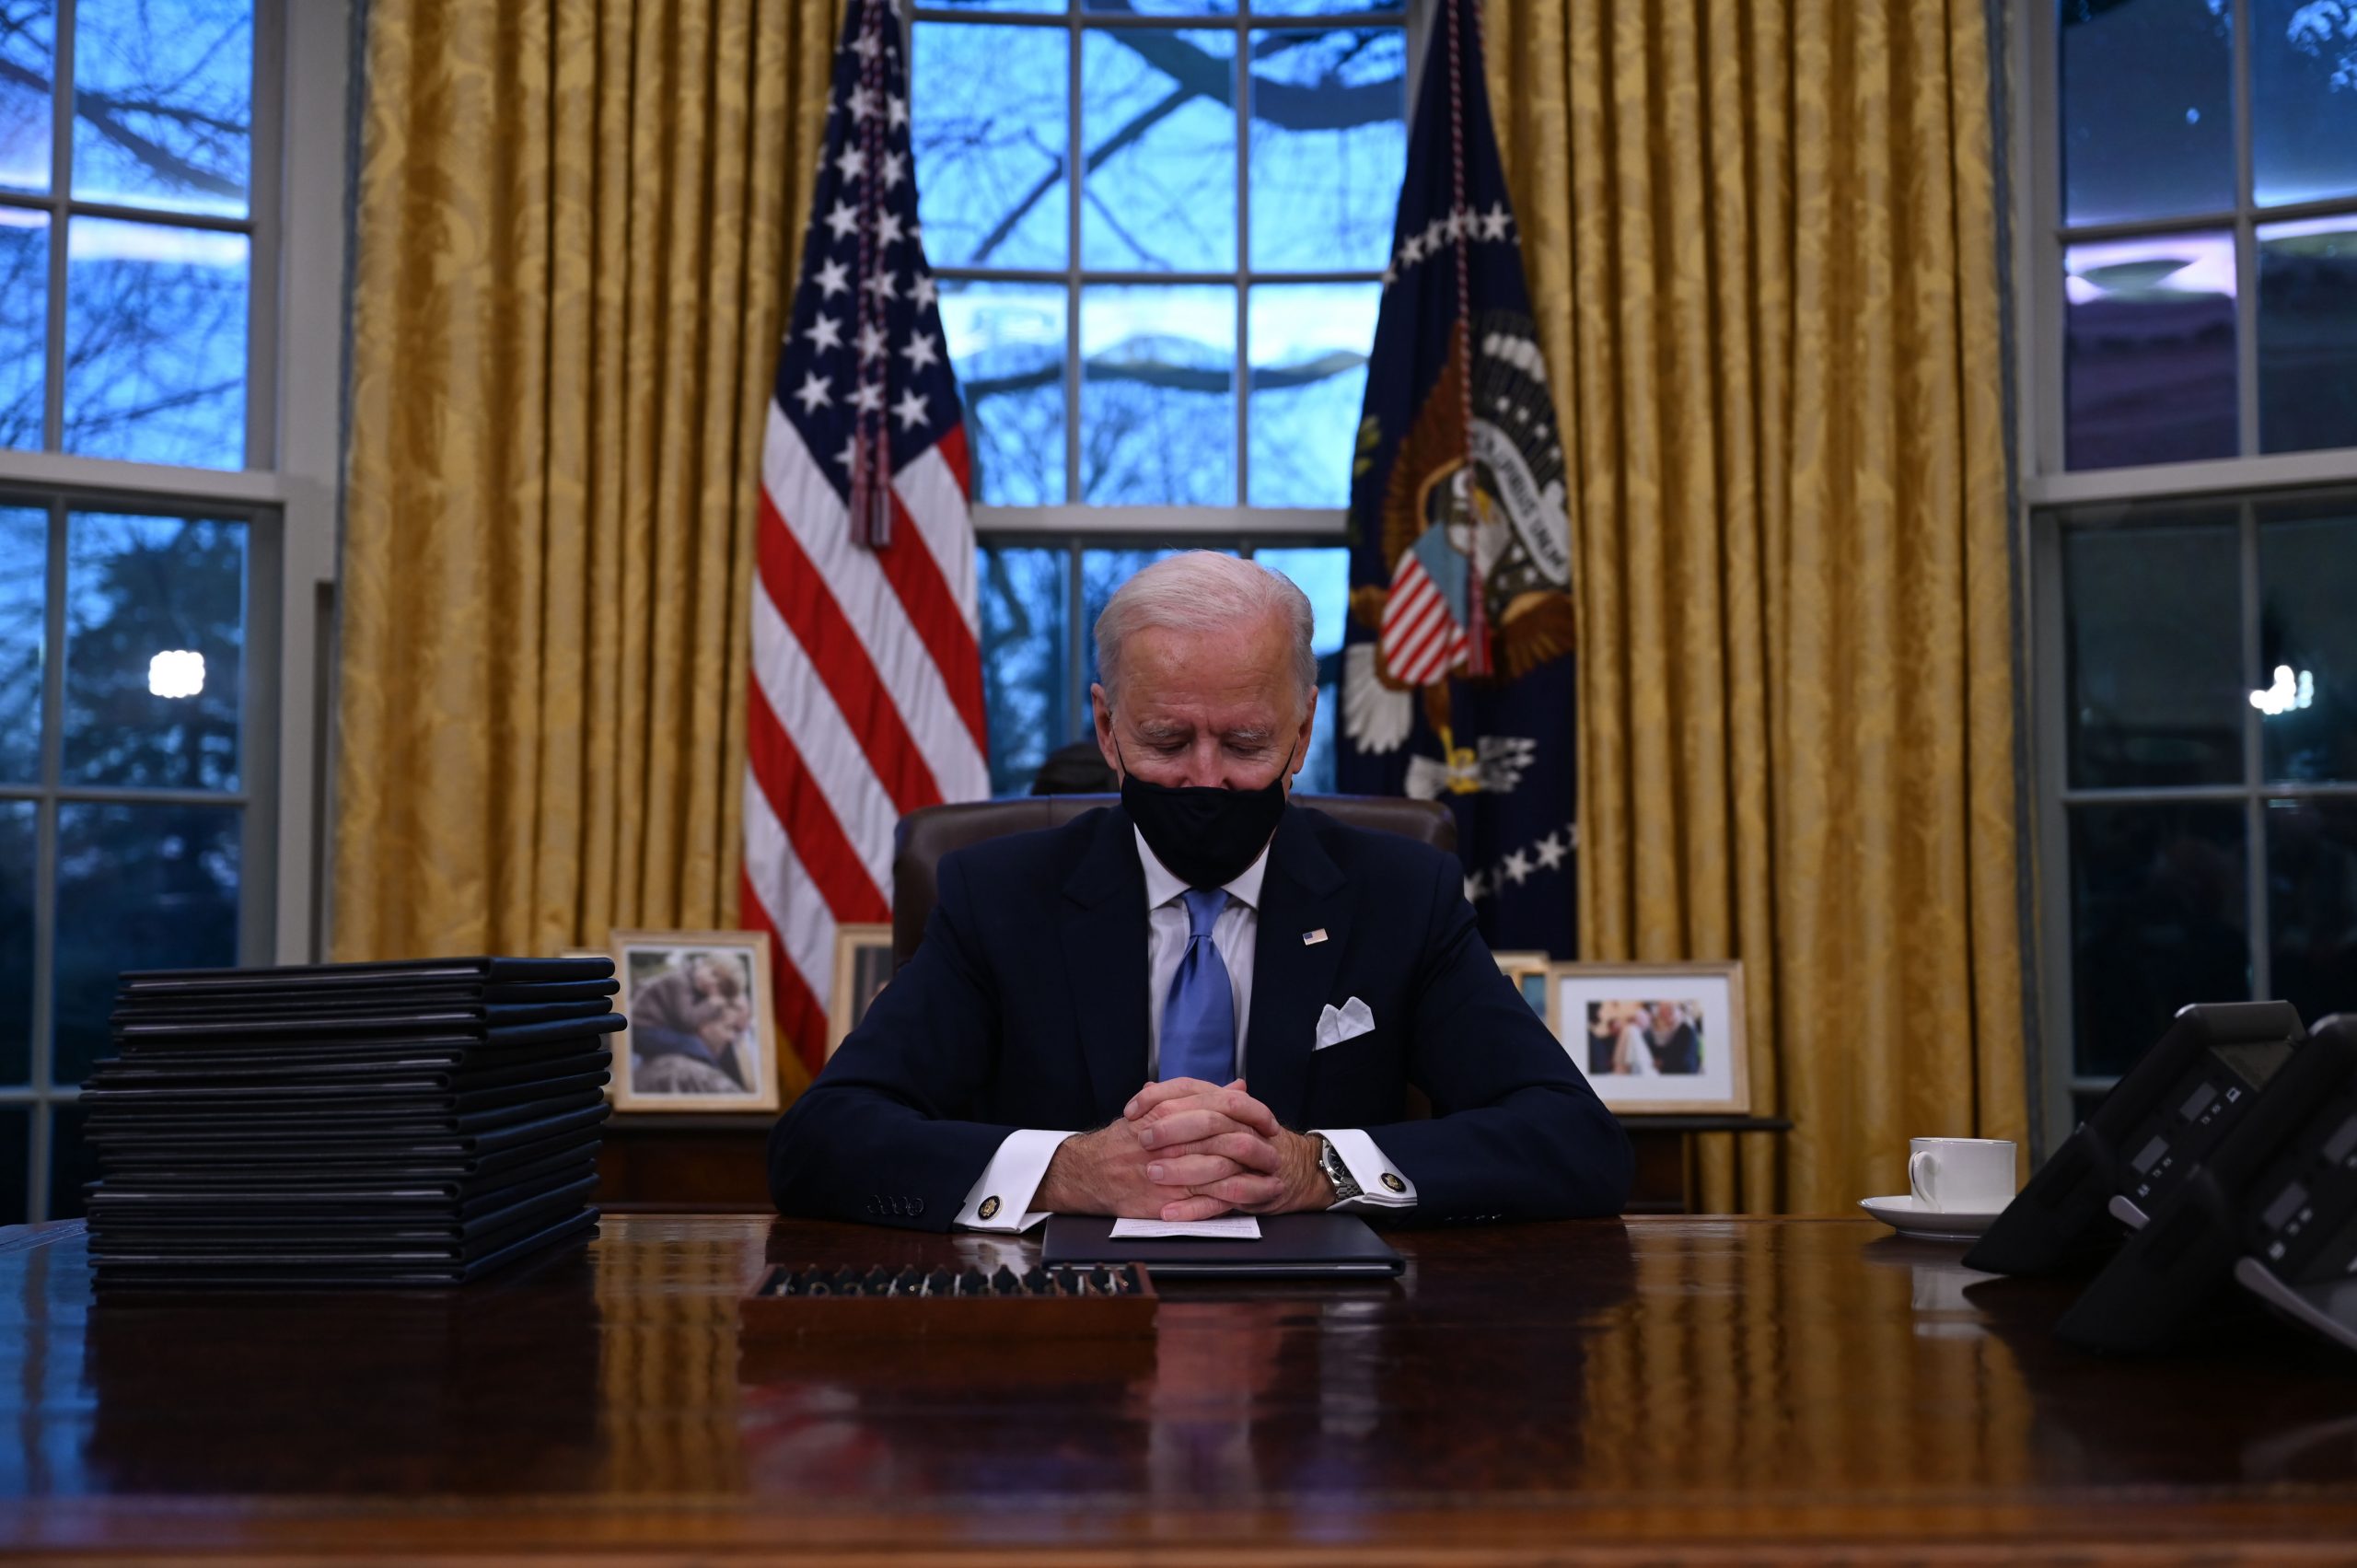 Biden talks climate change, COVID-19 with Macron in first phone call: French presidency